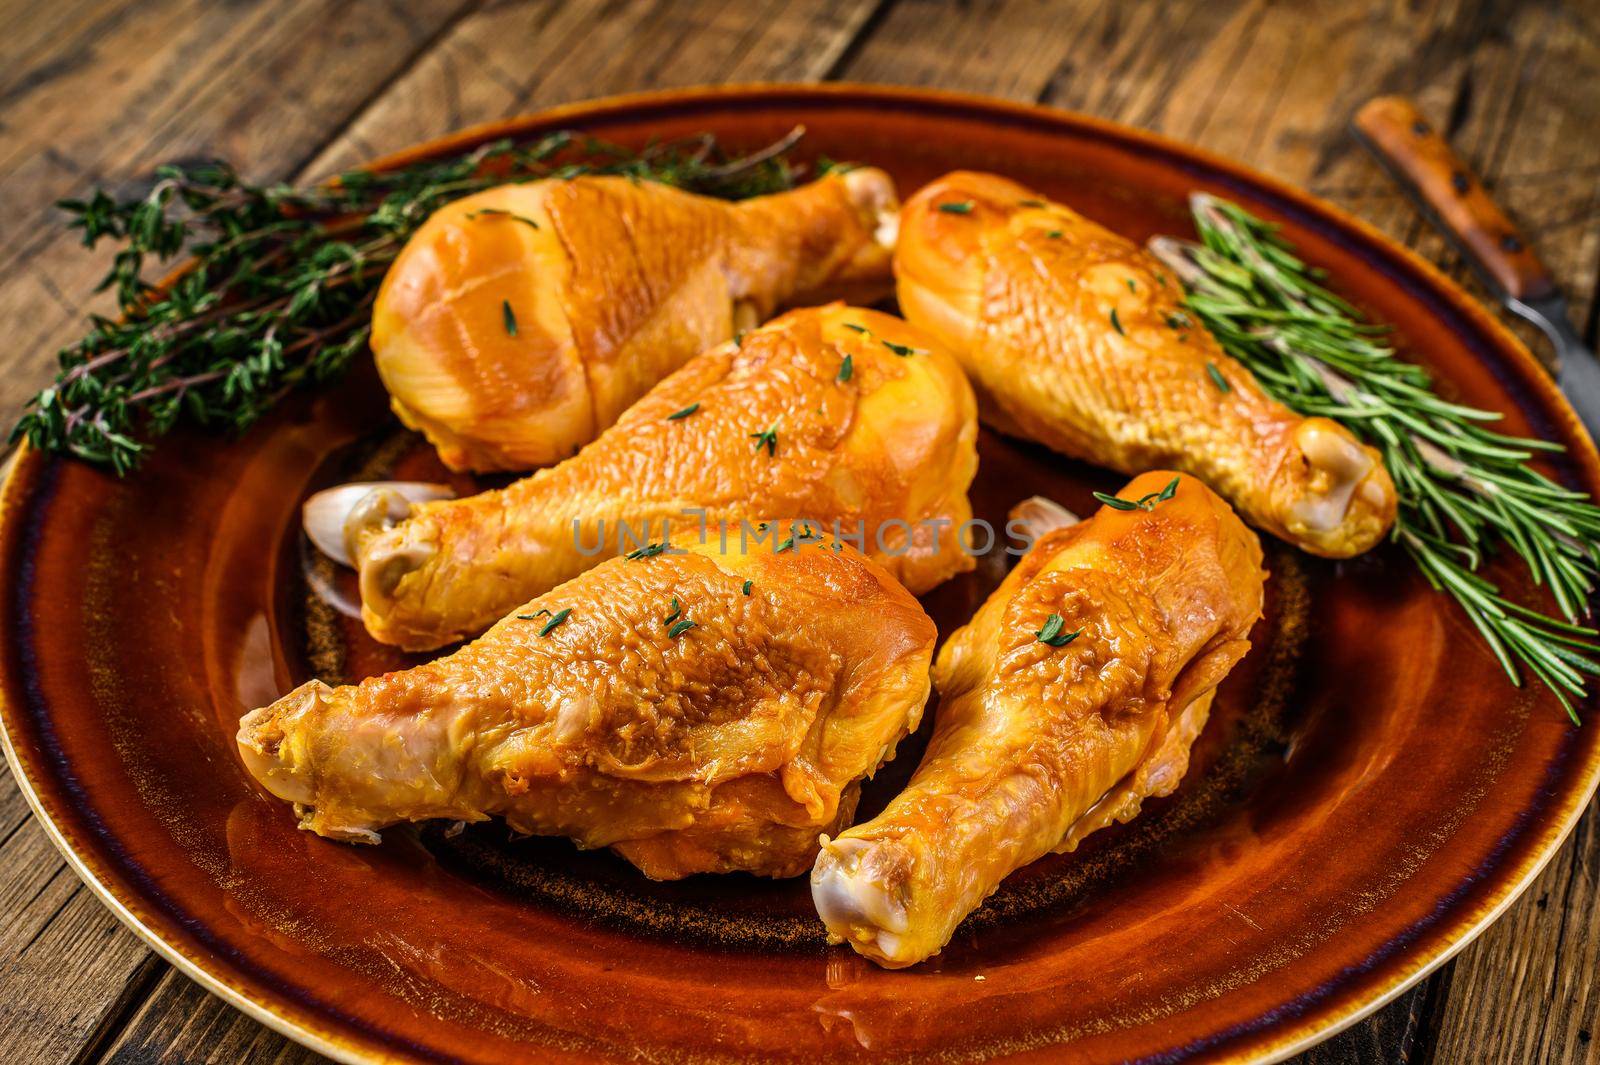 Fresh Smoked chicken drumsticks on a rustic plate with herbs. wooden background. Top view.